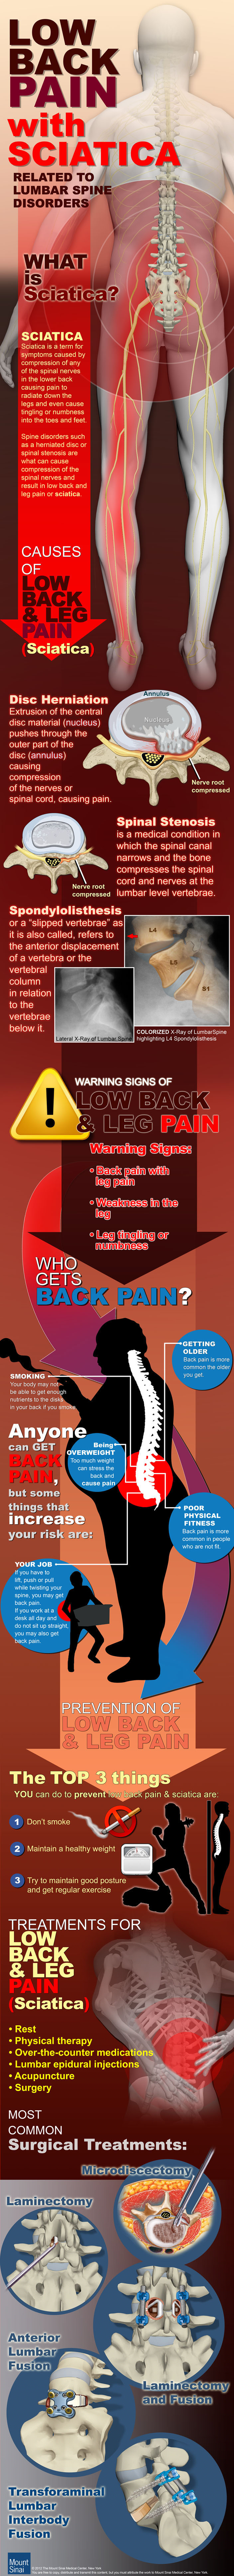 Low Back Pain with Sciatica